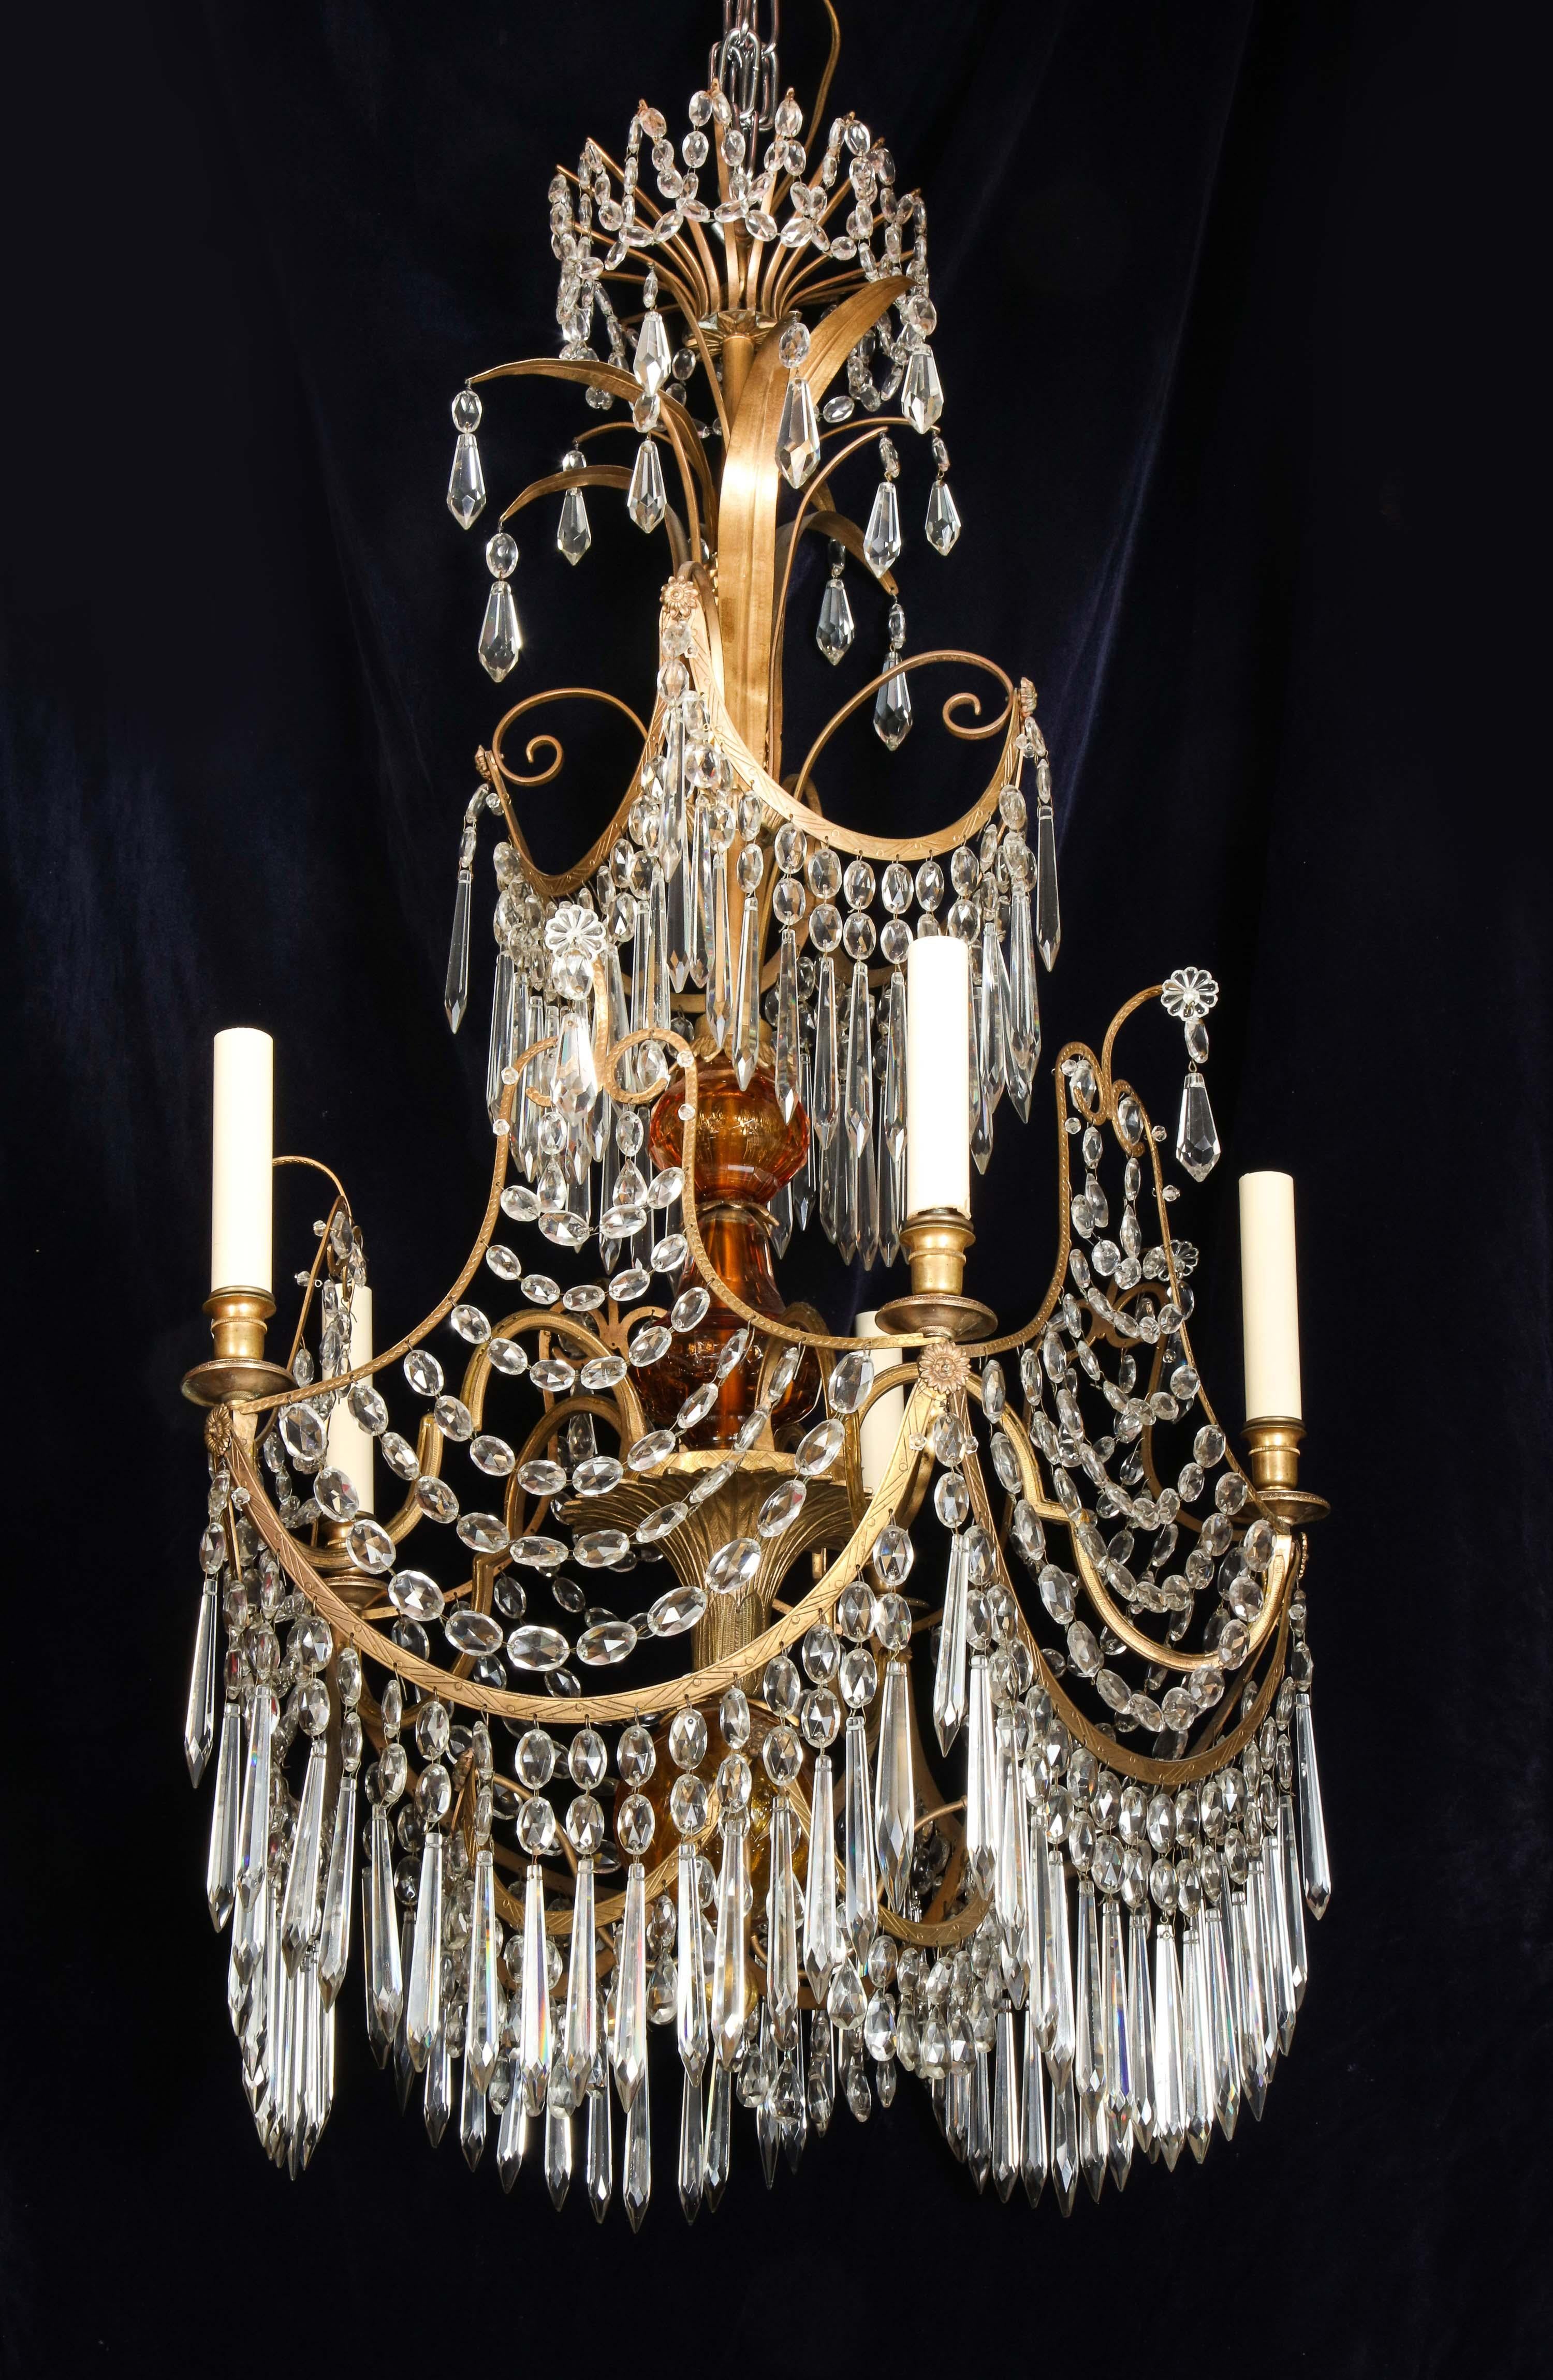 A rare antique Russian neoclassical multi light gilt bronze, amber glass and cut crystal multi light chandelier of very unique shape. This chandelier is of fine workmanship embellished with amber glass in the center and further adorned with cut